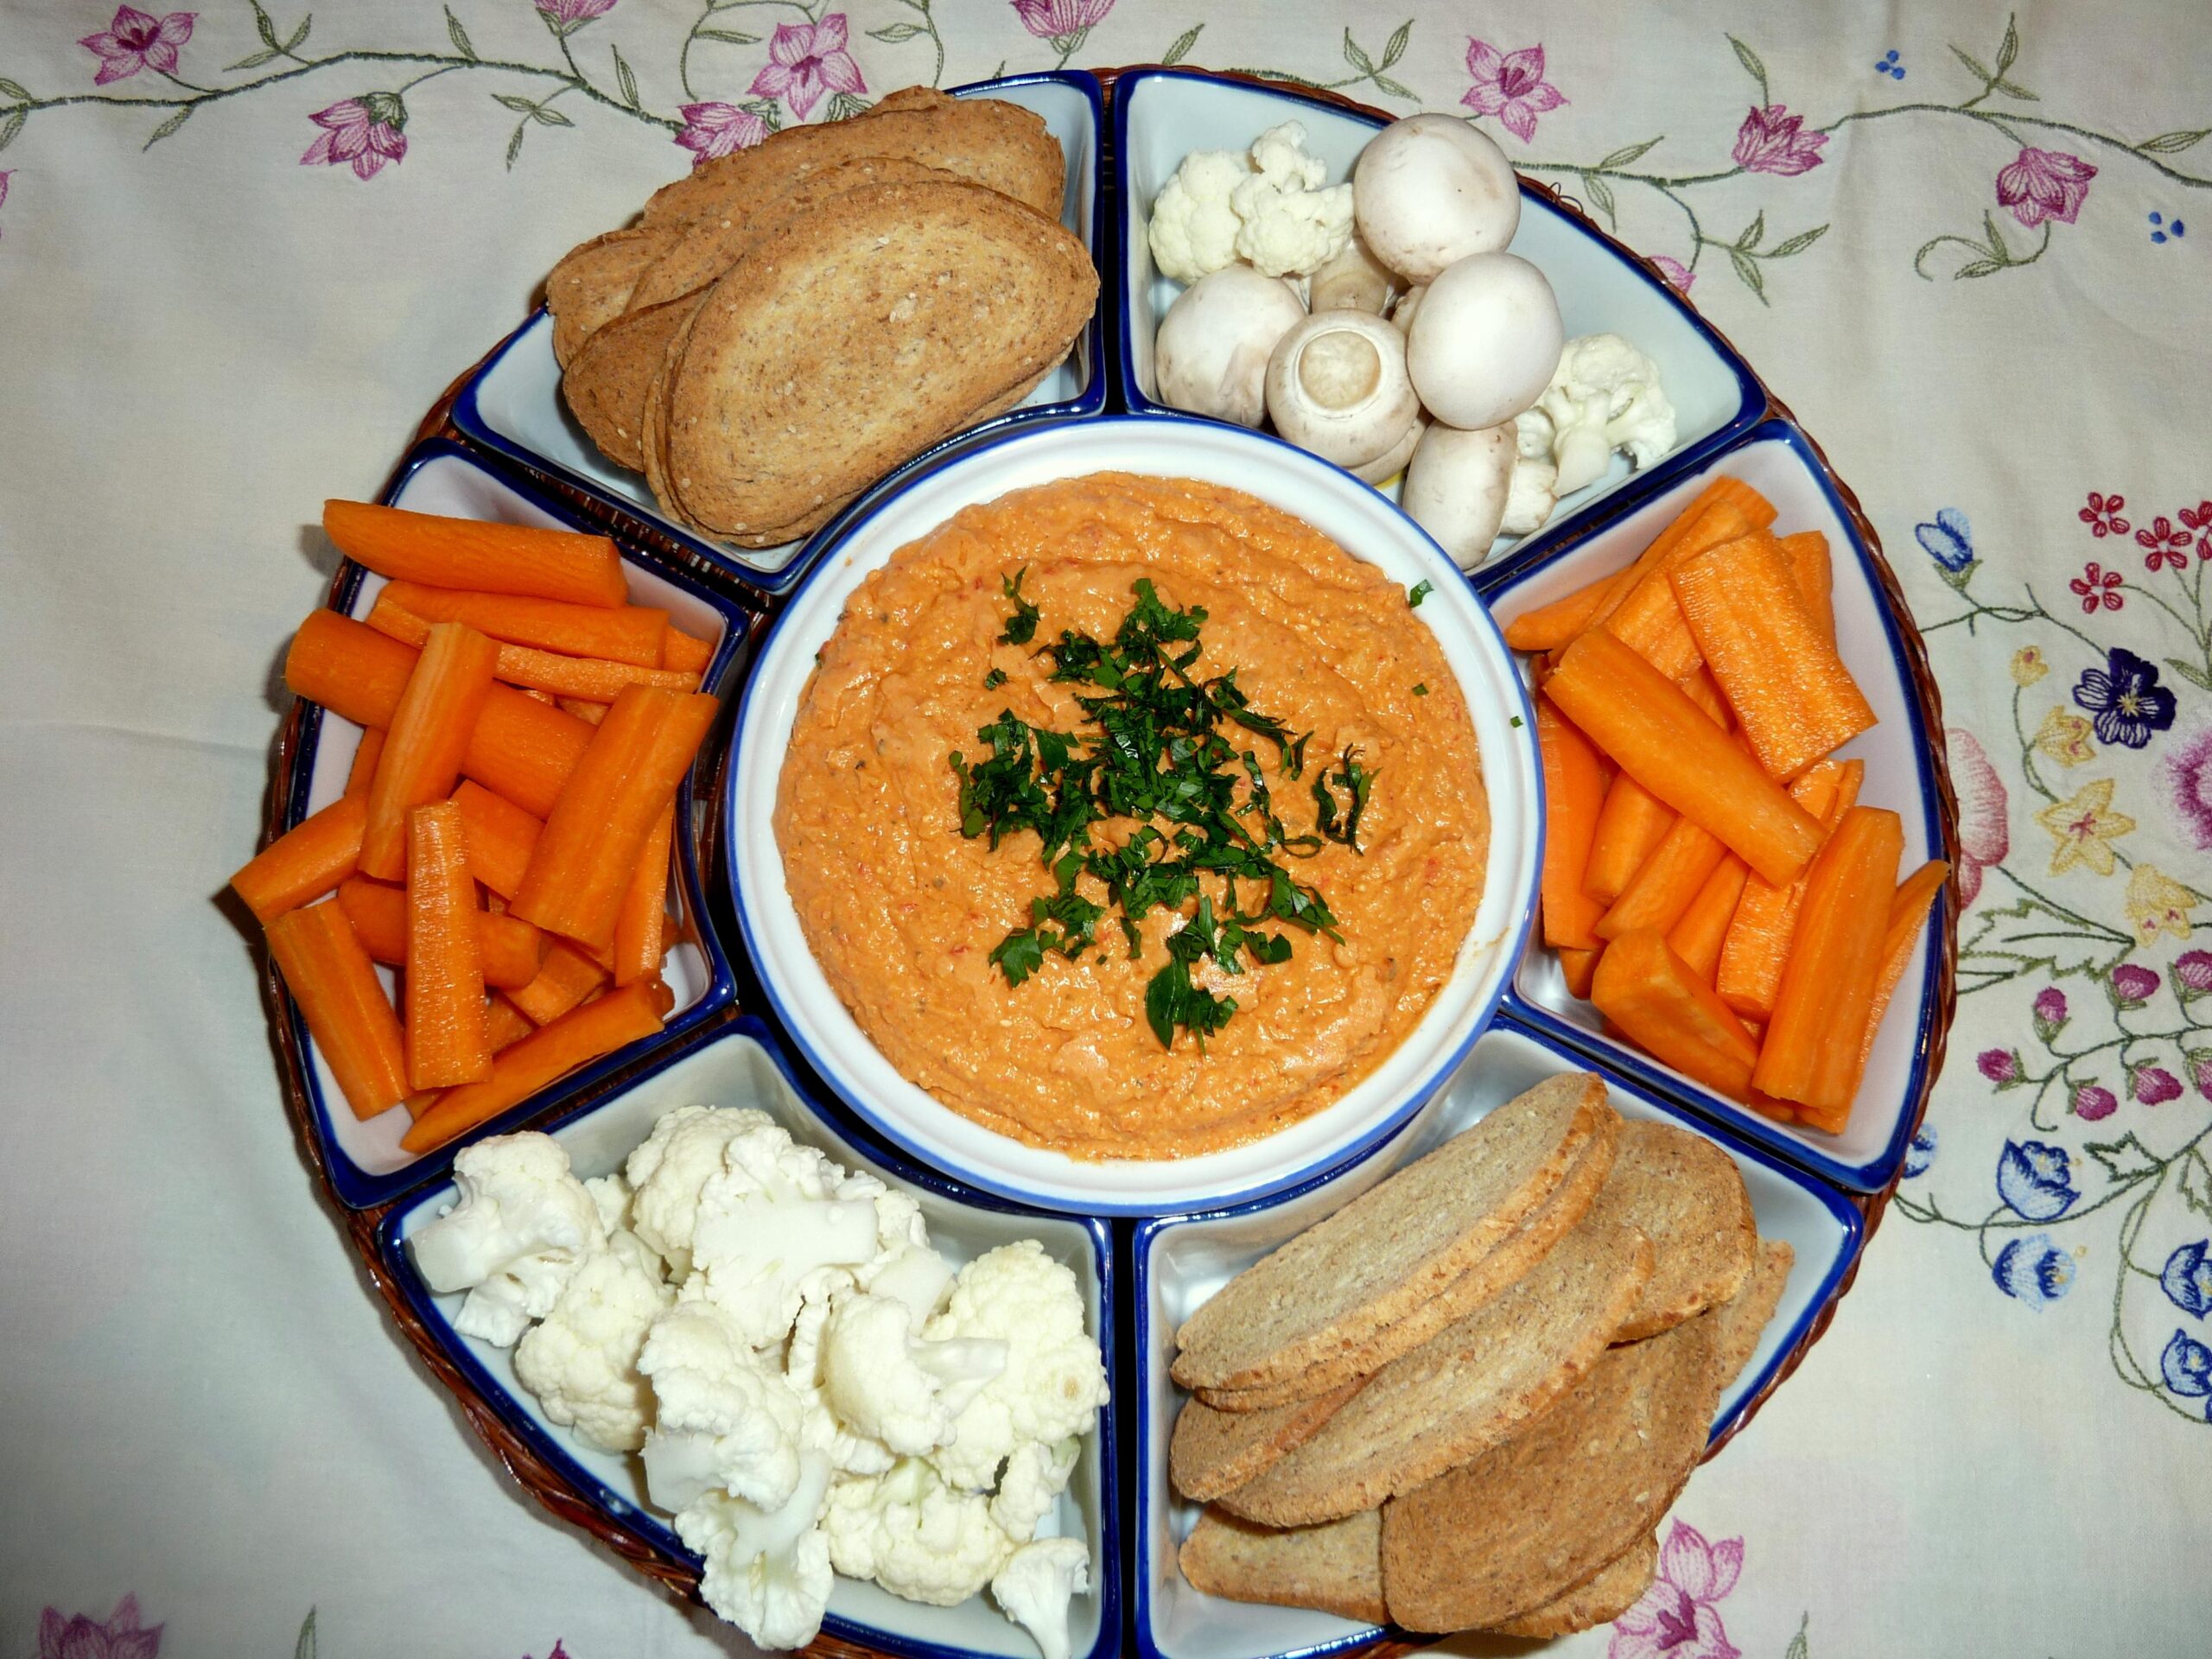  Spice up your snacking routine with this roasted red pepper hummus!